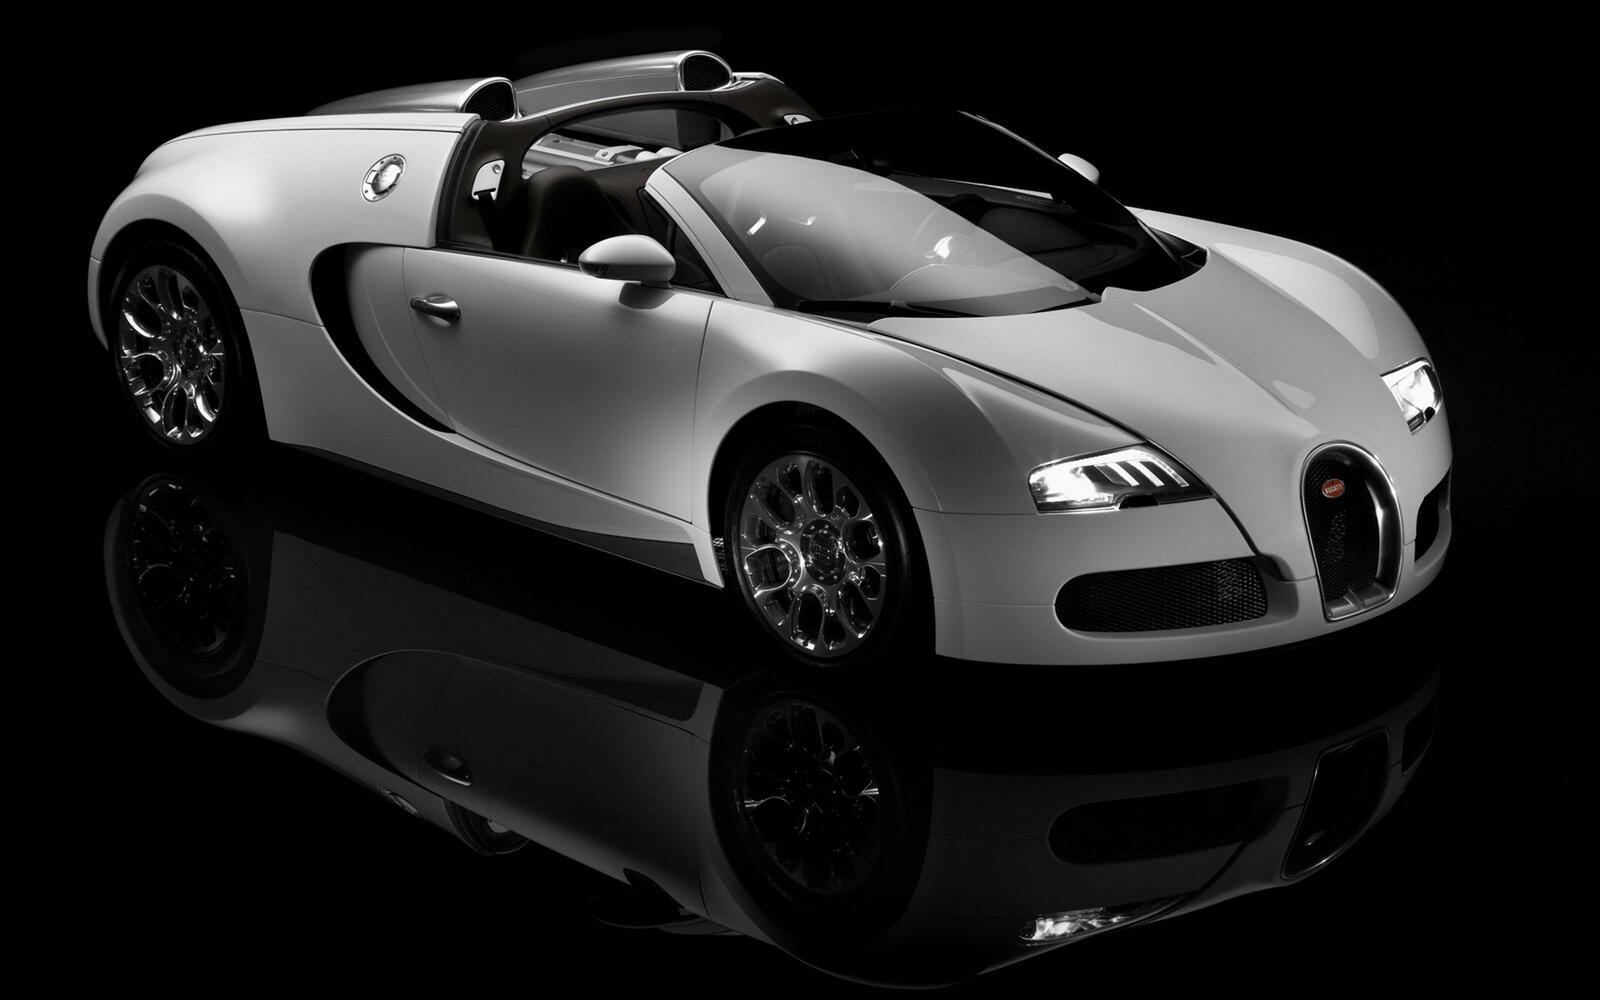 Wallpapers bugatti veyron sports car cabriolet on the desktop